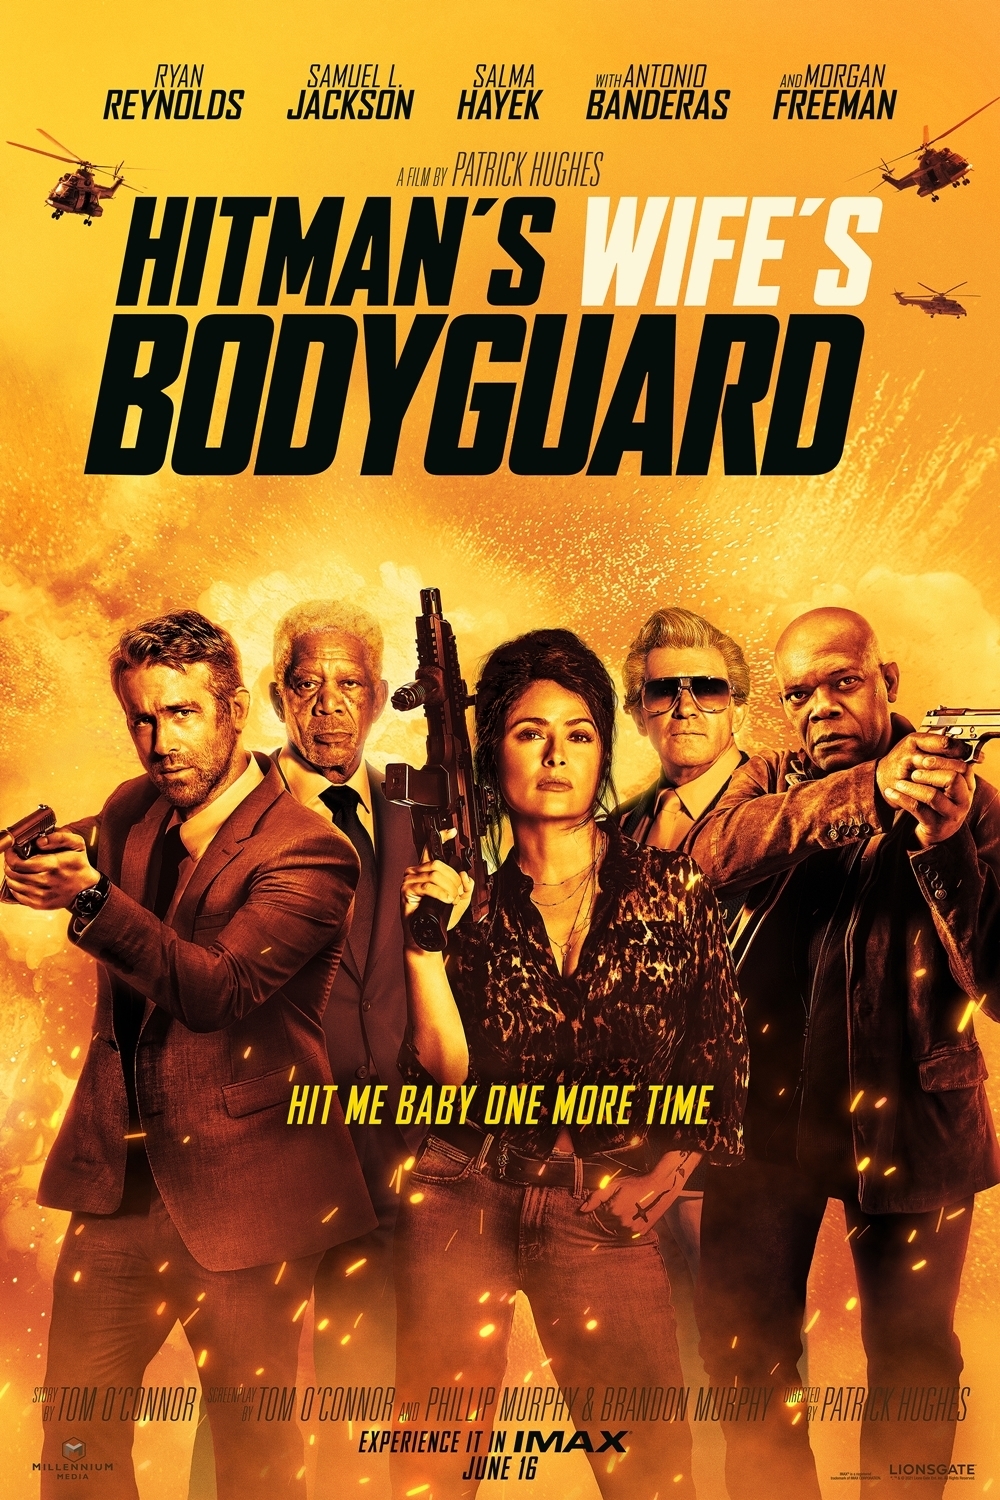 The Hitman's Wife's Bodyguard Poster